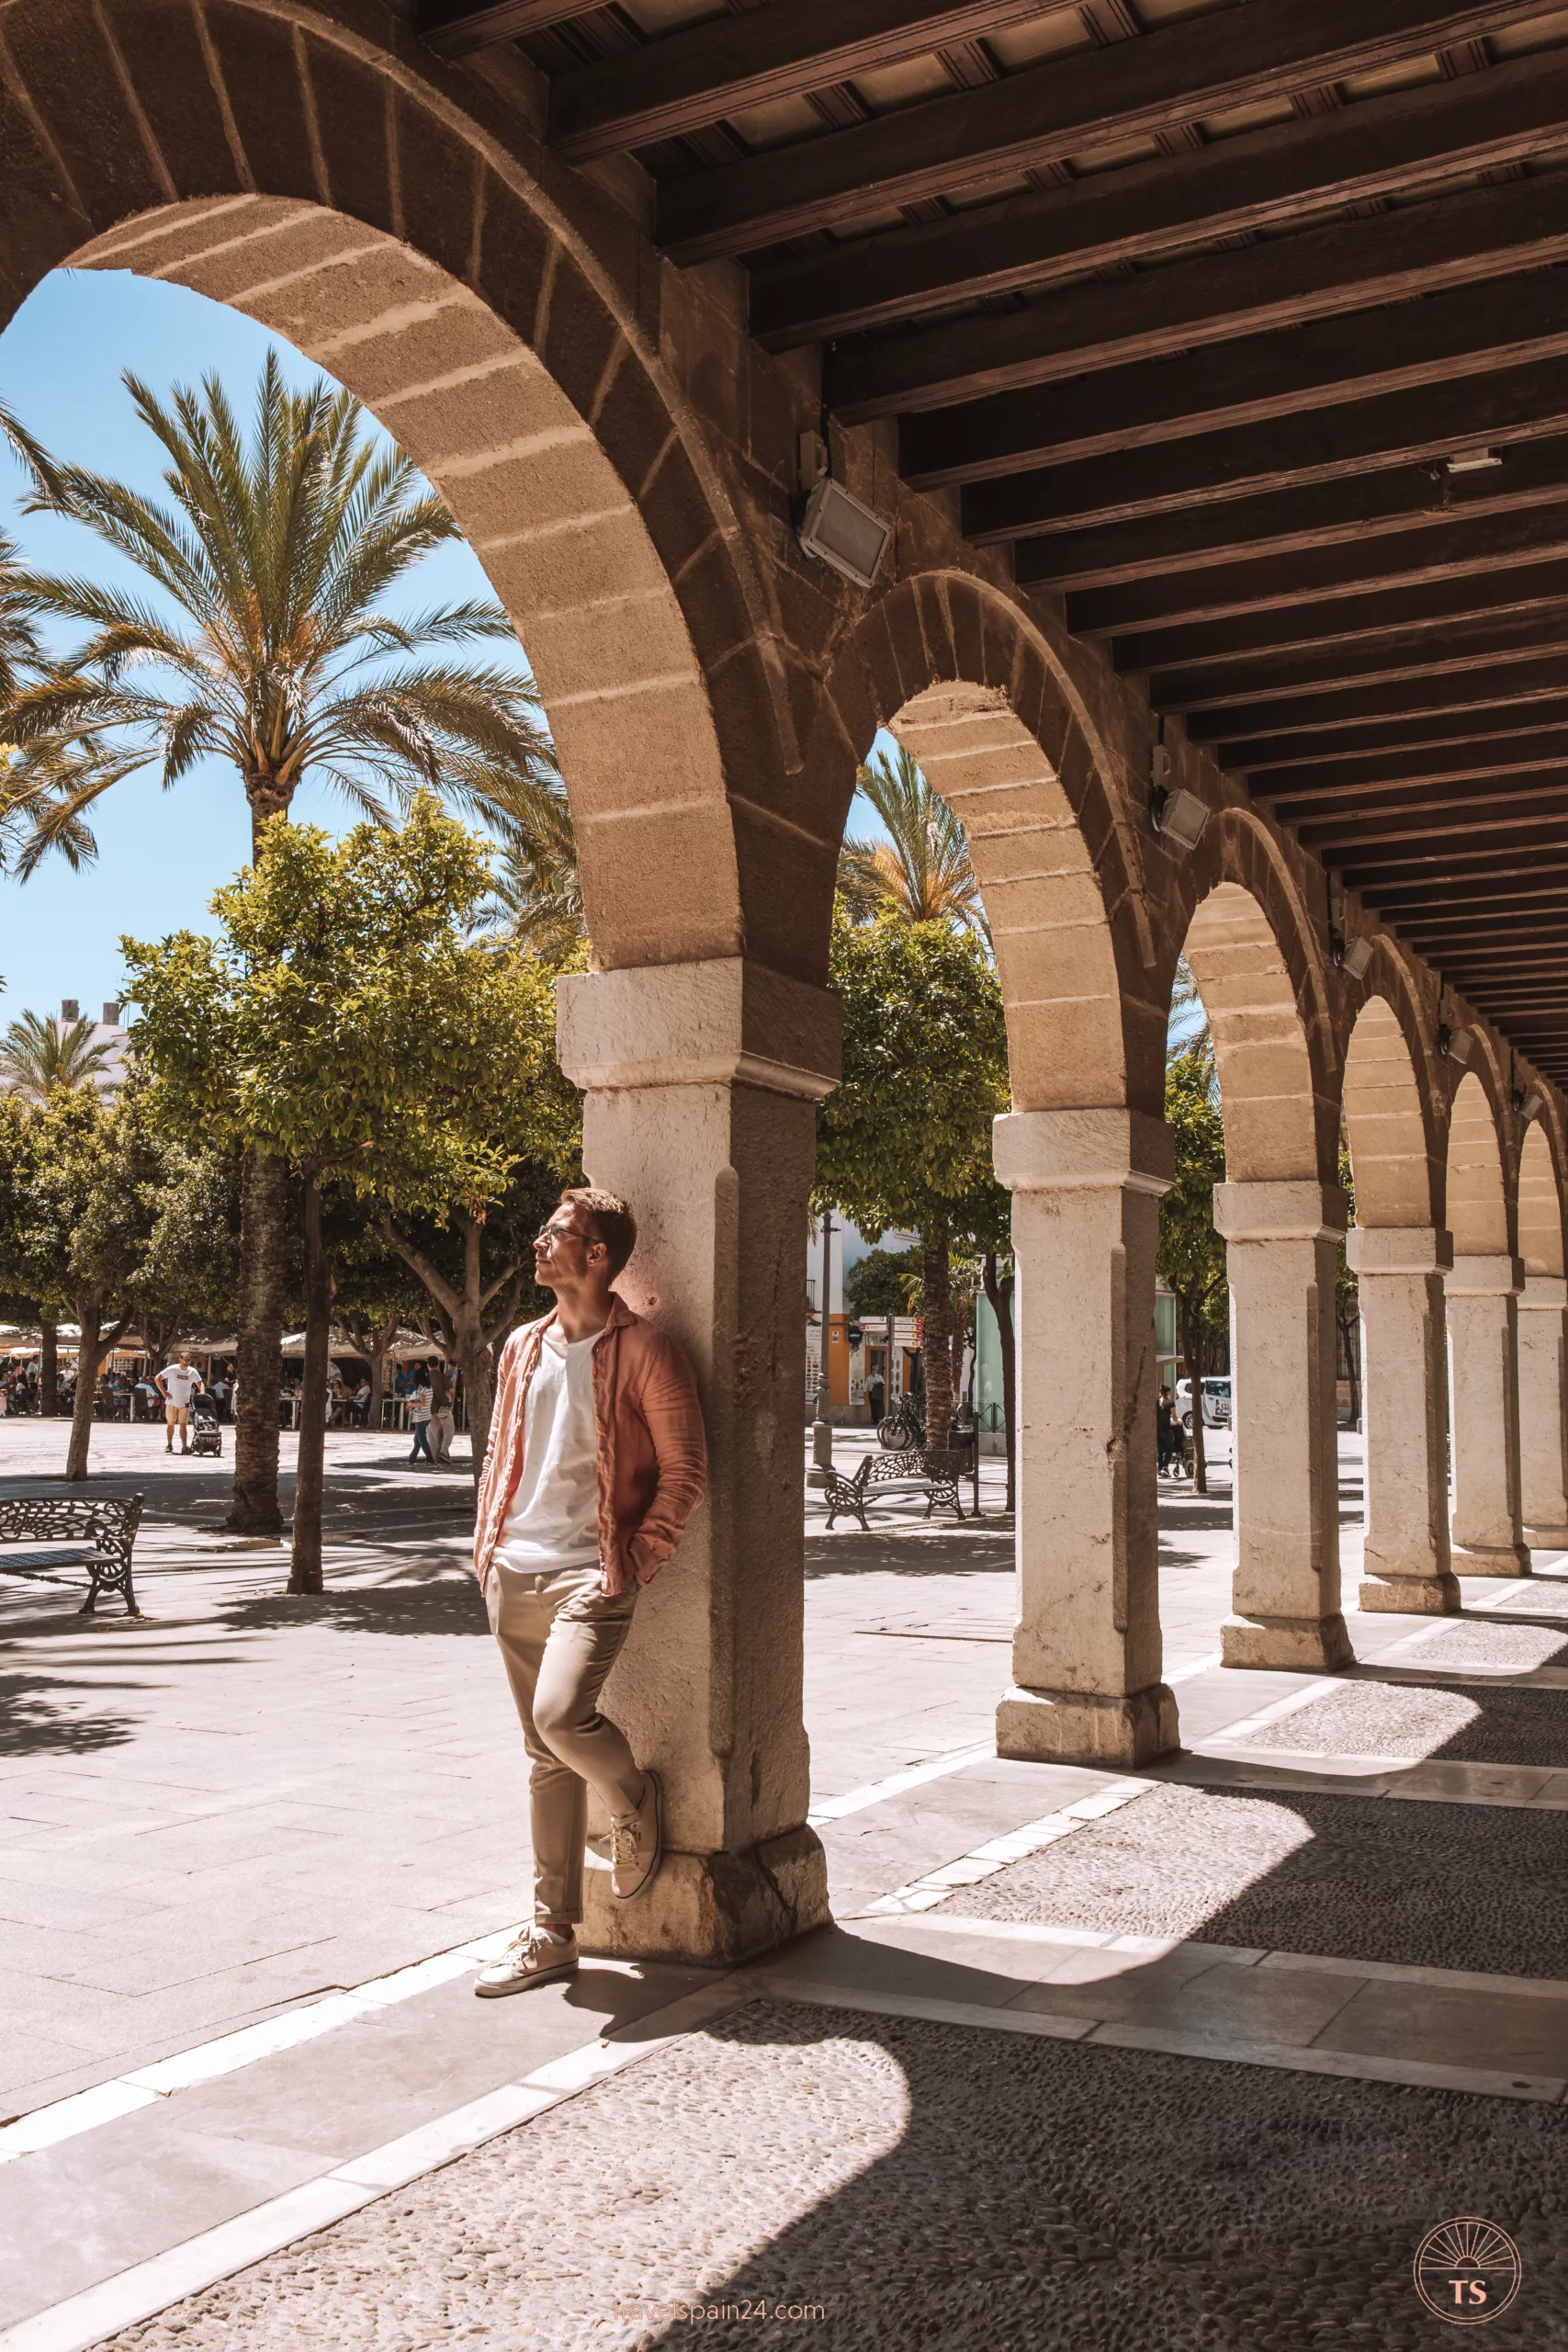 Timon van Basten leaning against an arch of a building in Jerez de la Frontera, with a view of the plaza in the background. This image captures the charm of exploring the city's streets.